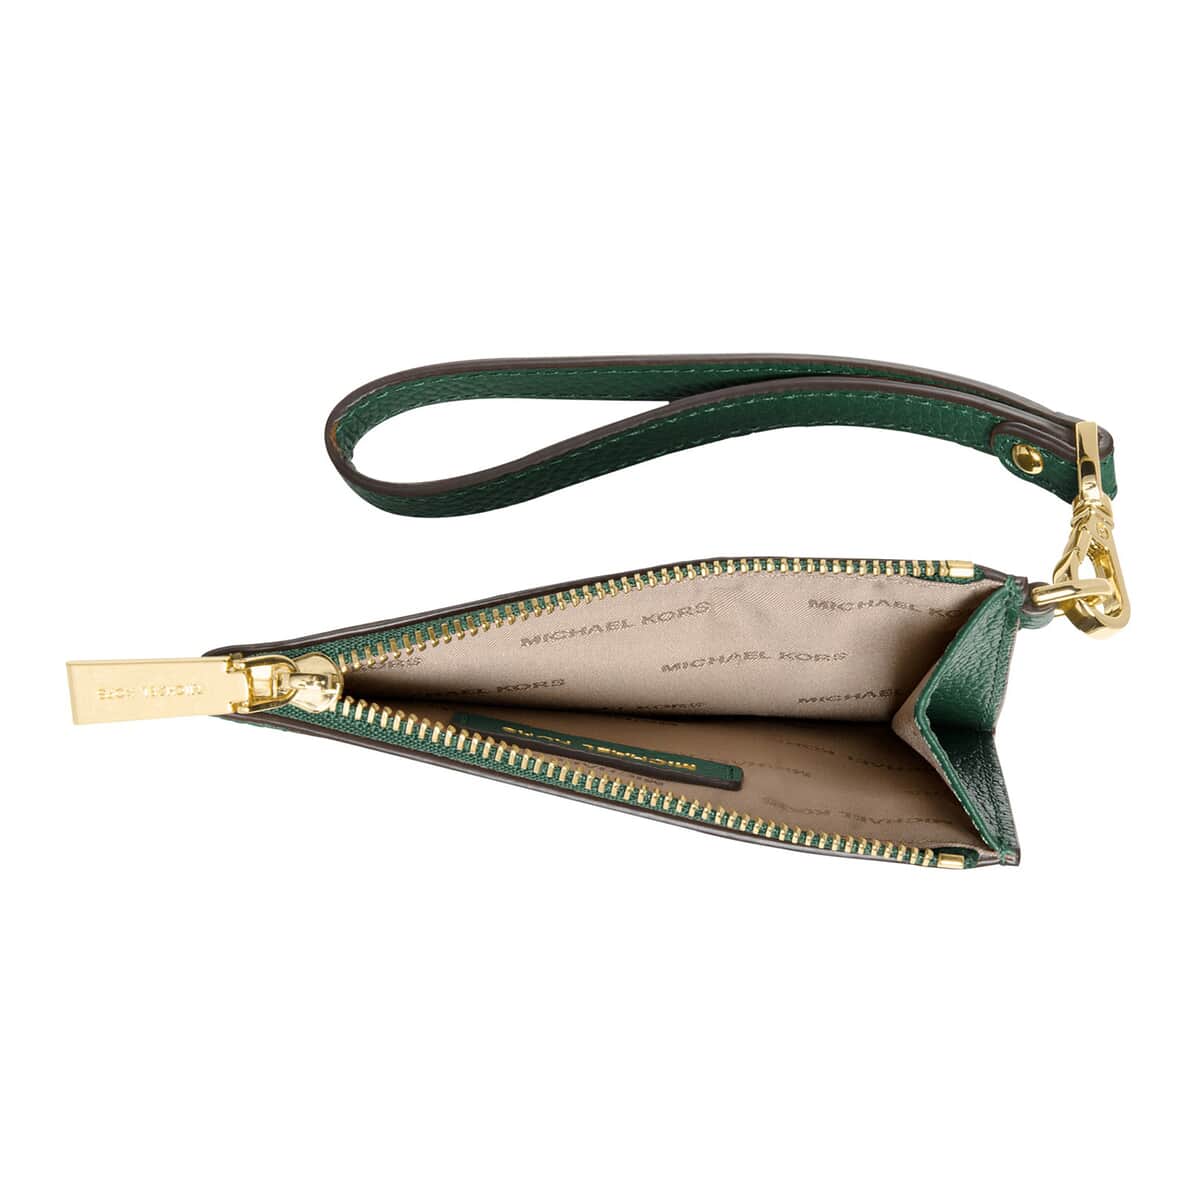 Michael Kors Green Pebbled Leather Jet Set Small Coin Purse (Ships in 8-10 Business Days)  image number 2